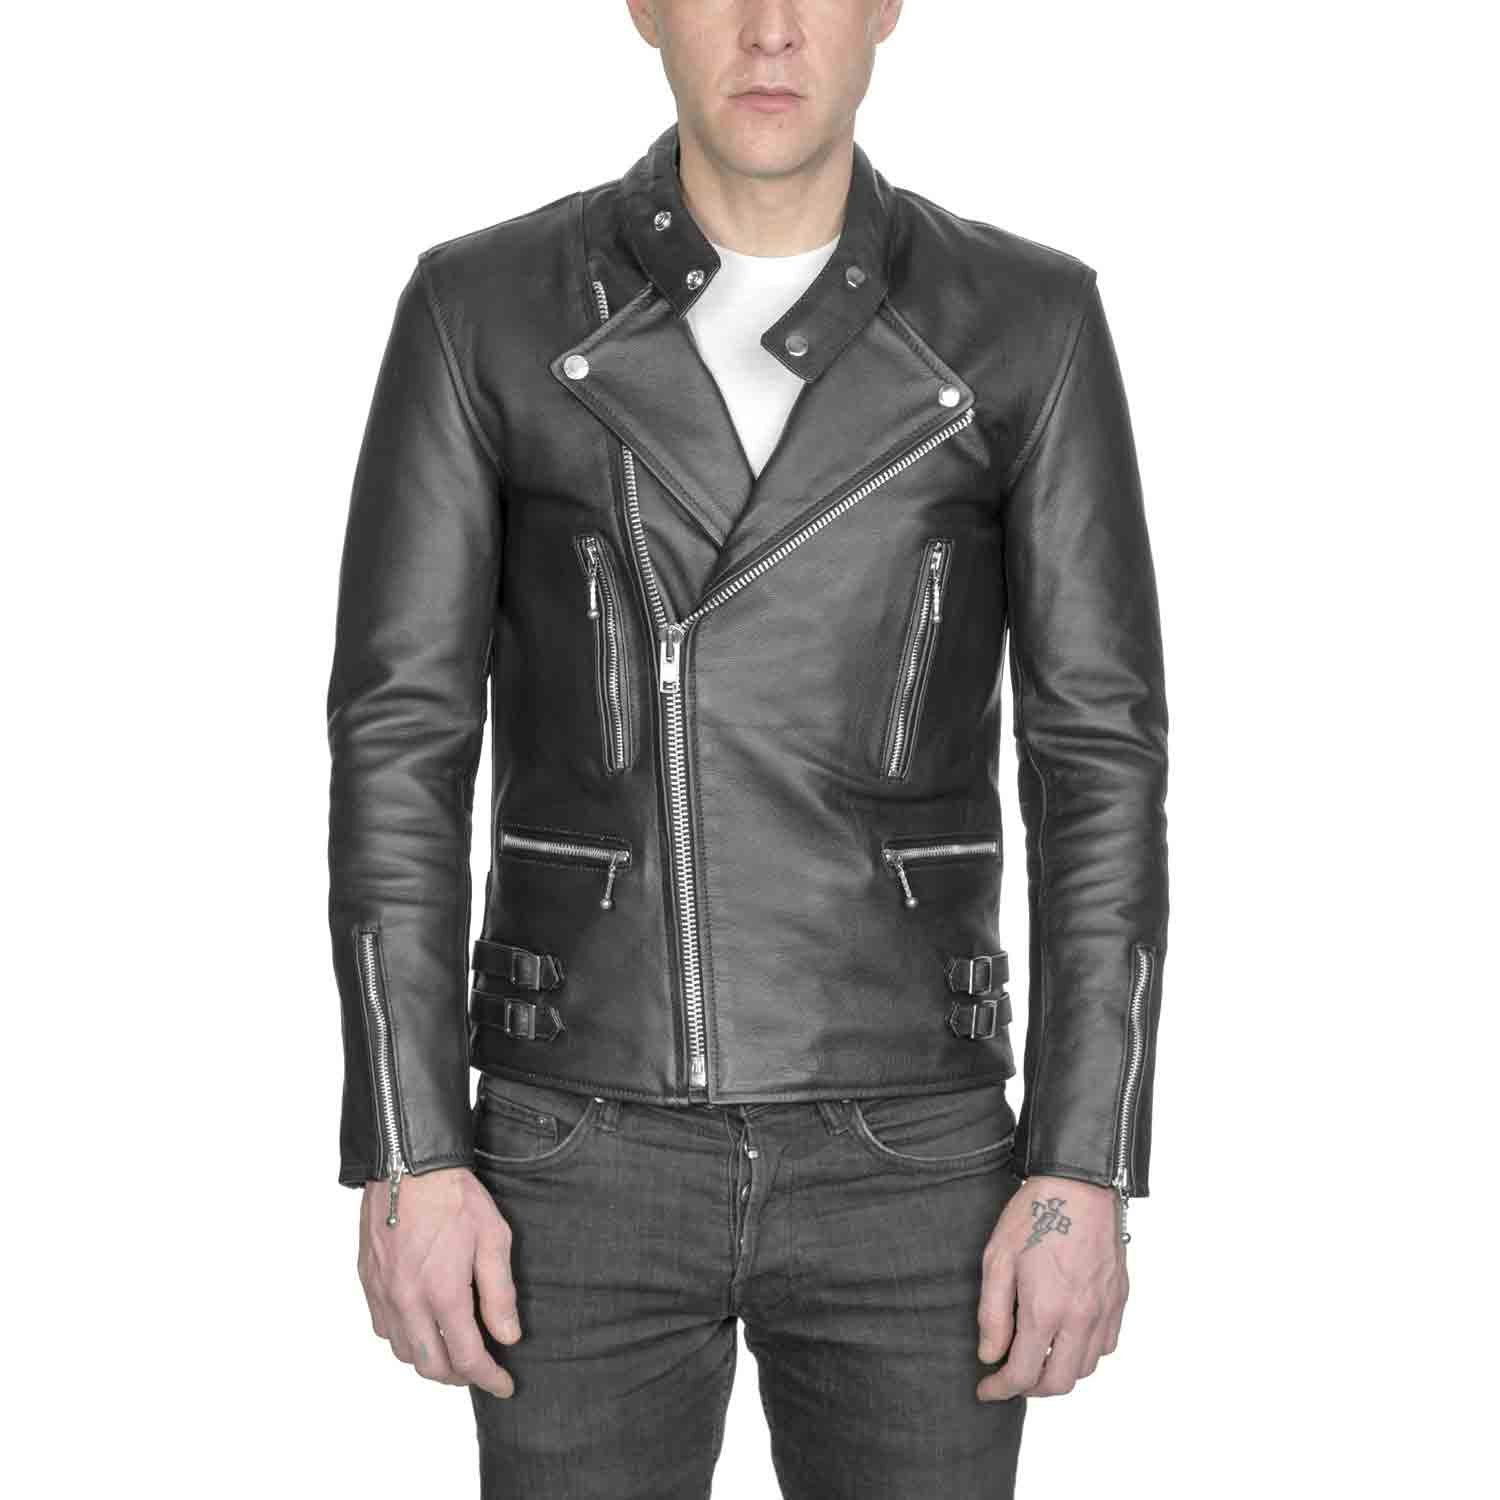 STRAIGHT TO HELL, Mens Commando Leather Jacket, 40 Long, Black and Brass  $285.00 - PicClick